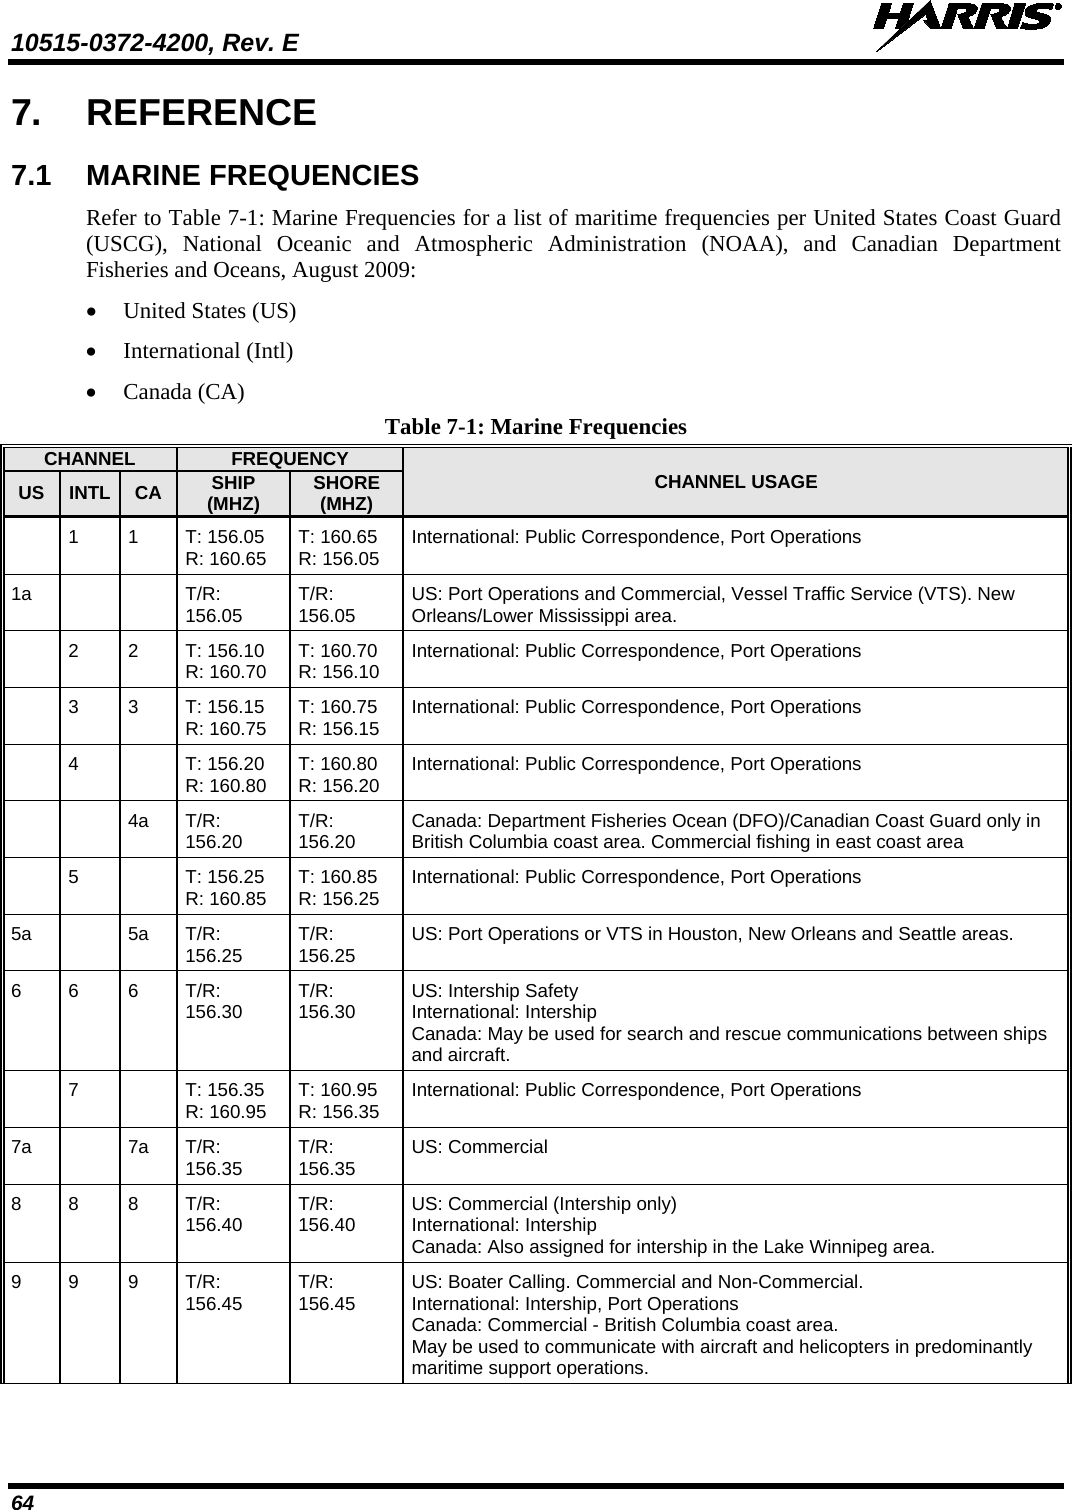 10515-0372-4200, Rev. E   64 7. REFERENCE 7.1 MARINE FREQUENCIES Refer to Table 7-1: Marine Frequencies for a list of maritime frequencies per United States Coast Guard (USCG), National Oceanic and Atmospheric Administration (NOAA), and Canadian Department Fisheries and Oceans, August 2009: • United States (US) • International (Intl) • Canada (CA) Table 7-1: Marine Frequencies CHANNEL FREQUENCY CHANNEL USAGE US INTL CA SHIP (MHZ) SHORE (MHZ)  1 1 T: 156.05 R: 160.65 T: 160.65 R: 156.05 International: Public Correspondence, Port Operations 1a   T/R: 156.05 T/R: 156.05 US: Port Operations and Commercial, Vessel Traffic Service (VTS). New Orleans/Lower Mississippi area.    2  2  T: 156.10 R: 160.70 T: 160.70  R: 156.10 International: Public Correspondence, Port Operations  3 3 T: 156.15 R: 160.75 T: 160.75 R: 156.15 International: Public Correspondence, Port Operations  4  T: 156.20  R: 160.80 T: 160.80  R: 156.20 International: Public Correspondence, Port Operations   4a T/R: 156.20 T/R: 156.20 Canada: Department Fisheries Ocean (DFO)/Canadian Coast Guard only in British Columbia coast area. Commercial fishing in east coast area   5    T: 156.25  R: 160.85 T: 160.85  R: 156.25 International: Public Correspondence, Port Operations 5a    5a T/R: 156.25 T/R: 156.25 US: Port Operations or VTS in Houston, New Orleans and Seattle areas. 6 6 6 T/R: 156.30 T/R: 156.30 US: Intership Safety International: Intership Canada: May be used for search and rescue communications between ships and aircraft.   7    T: 156.35  R: 160.95 T: 160.95  R: 156.35 International: Public Correspondence, Port Operations 7a  7a T/R: 156.35 T/R: 156.35 US: Commercial 8 8 8 T/R: 156.40 T/R: 156.40 US: Commercial (Intership only) International: Intership Canada: Also assigned for intership in the Lake Winnipeg area. 9  9  9  T/R: 156.45 T/R: 156.45 US: Boater Calling. Commercial and Non-Commercial. International: Intership, Port Operations Canada: Commercial - British Columbia coast area. May be used to communicate with aircraft and helicopters in predominantly maritime support operations. 